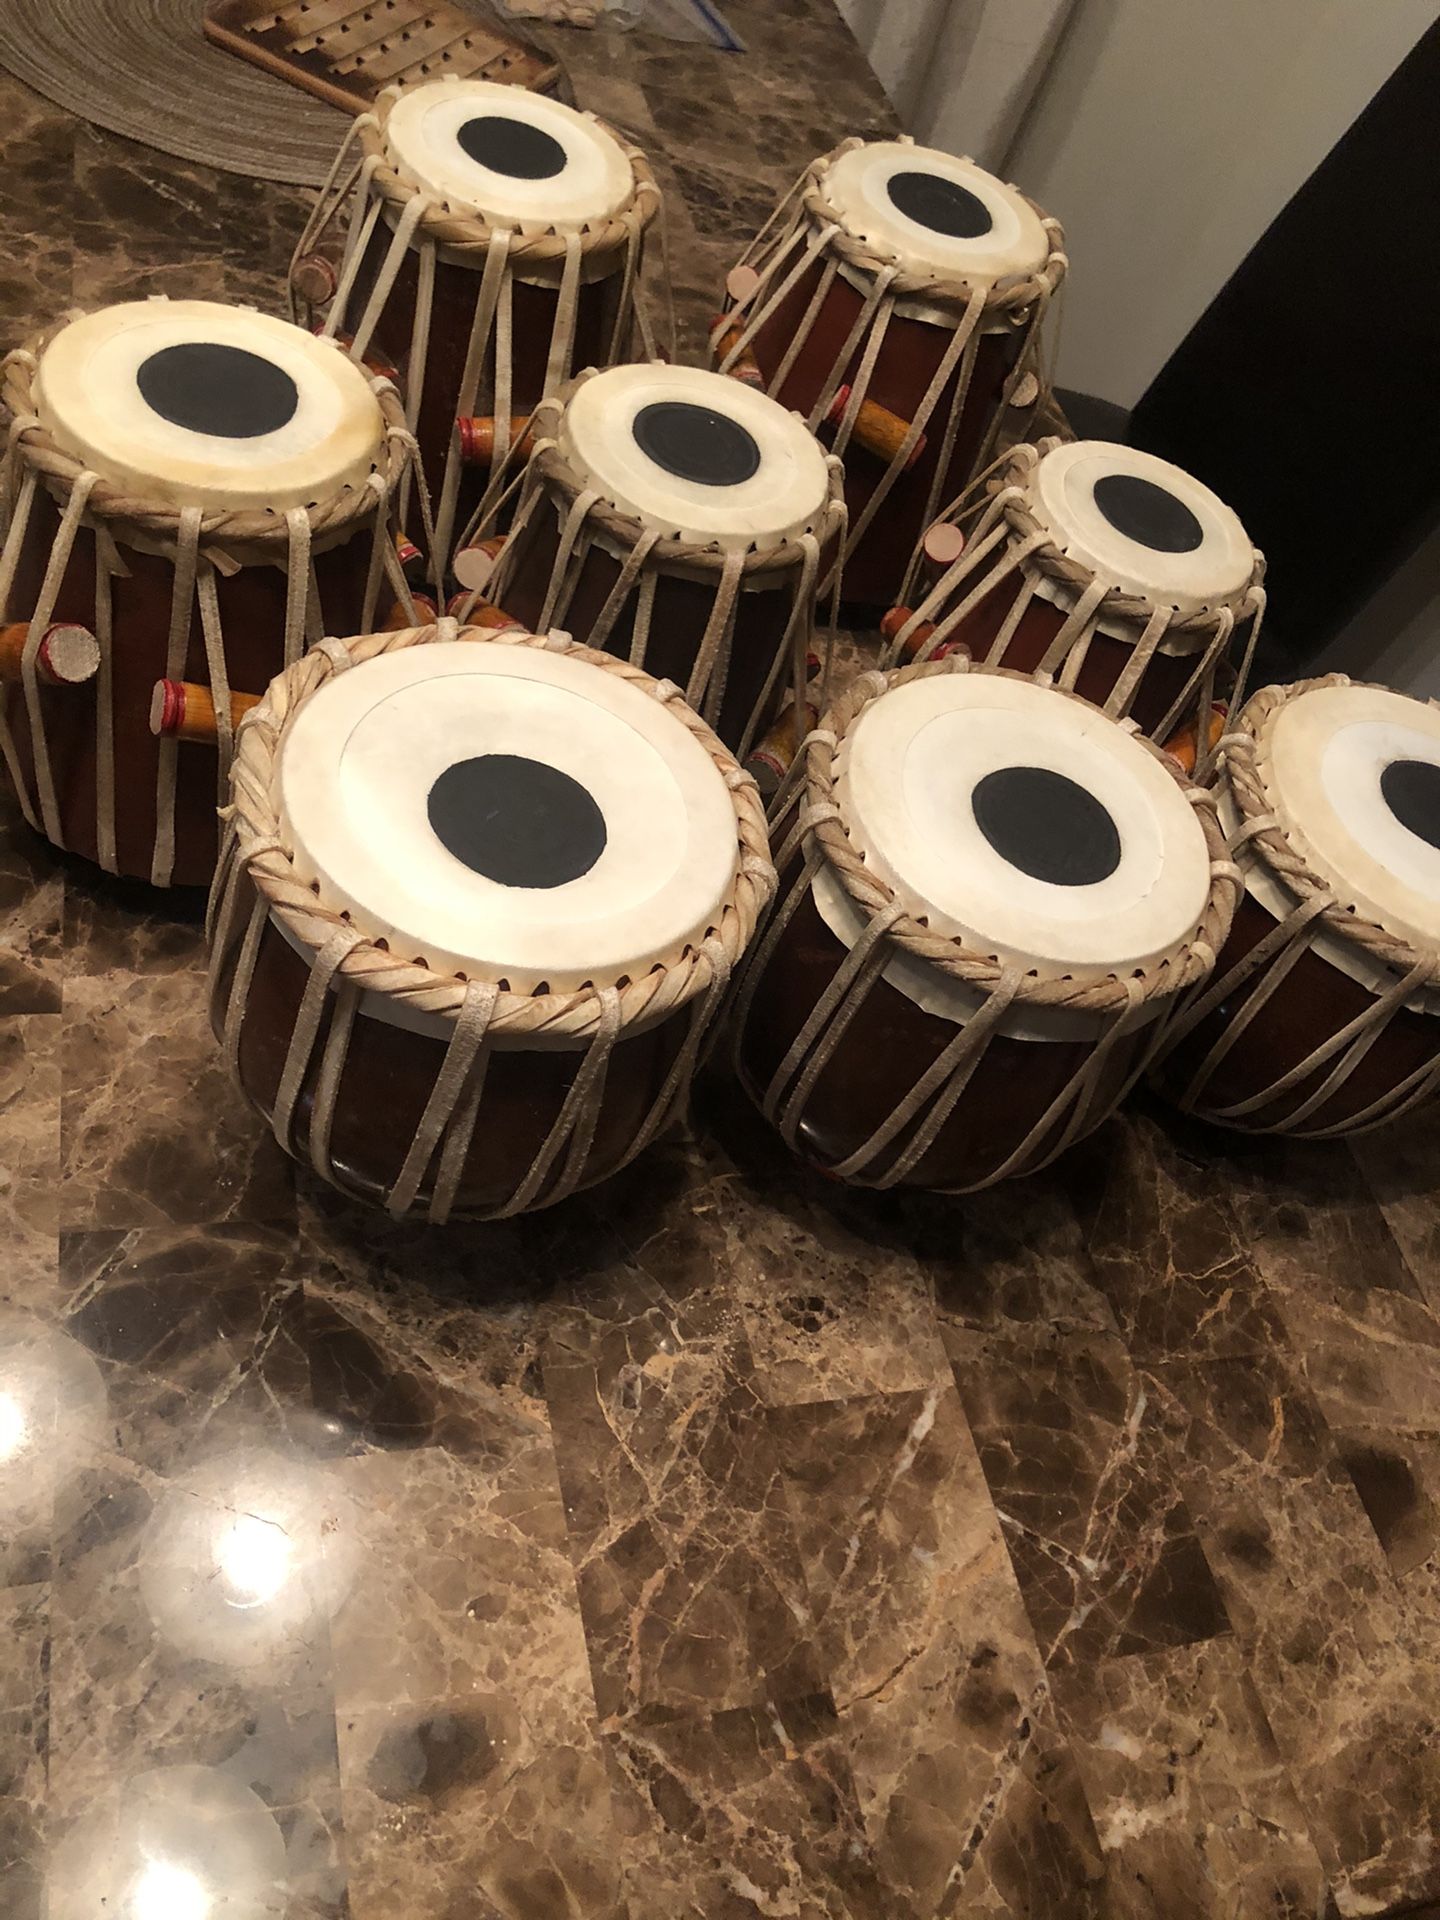 Brand New Authentic Indian Drums (rare) $20 per drum or $130 for all 8